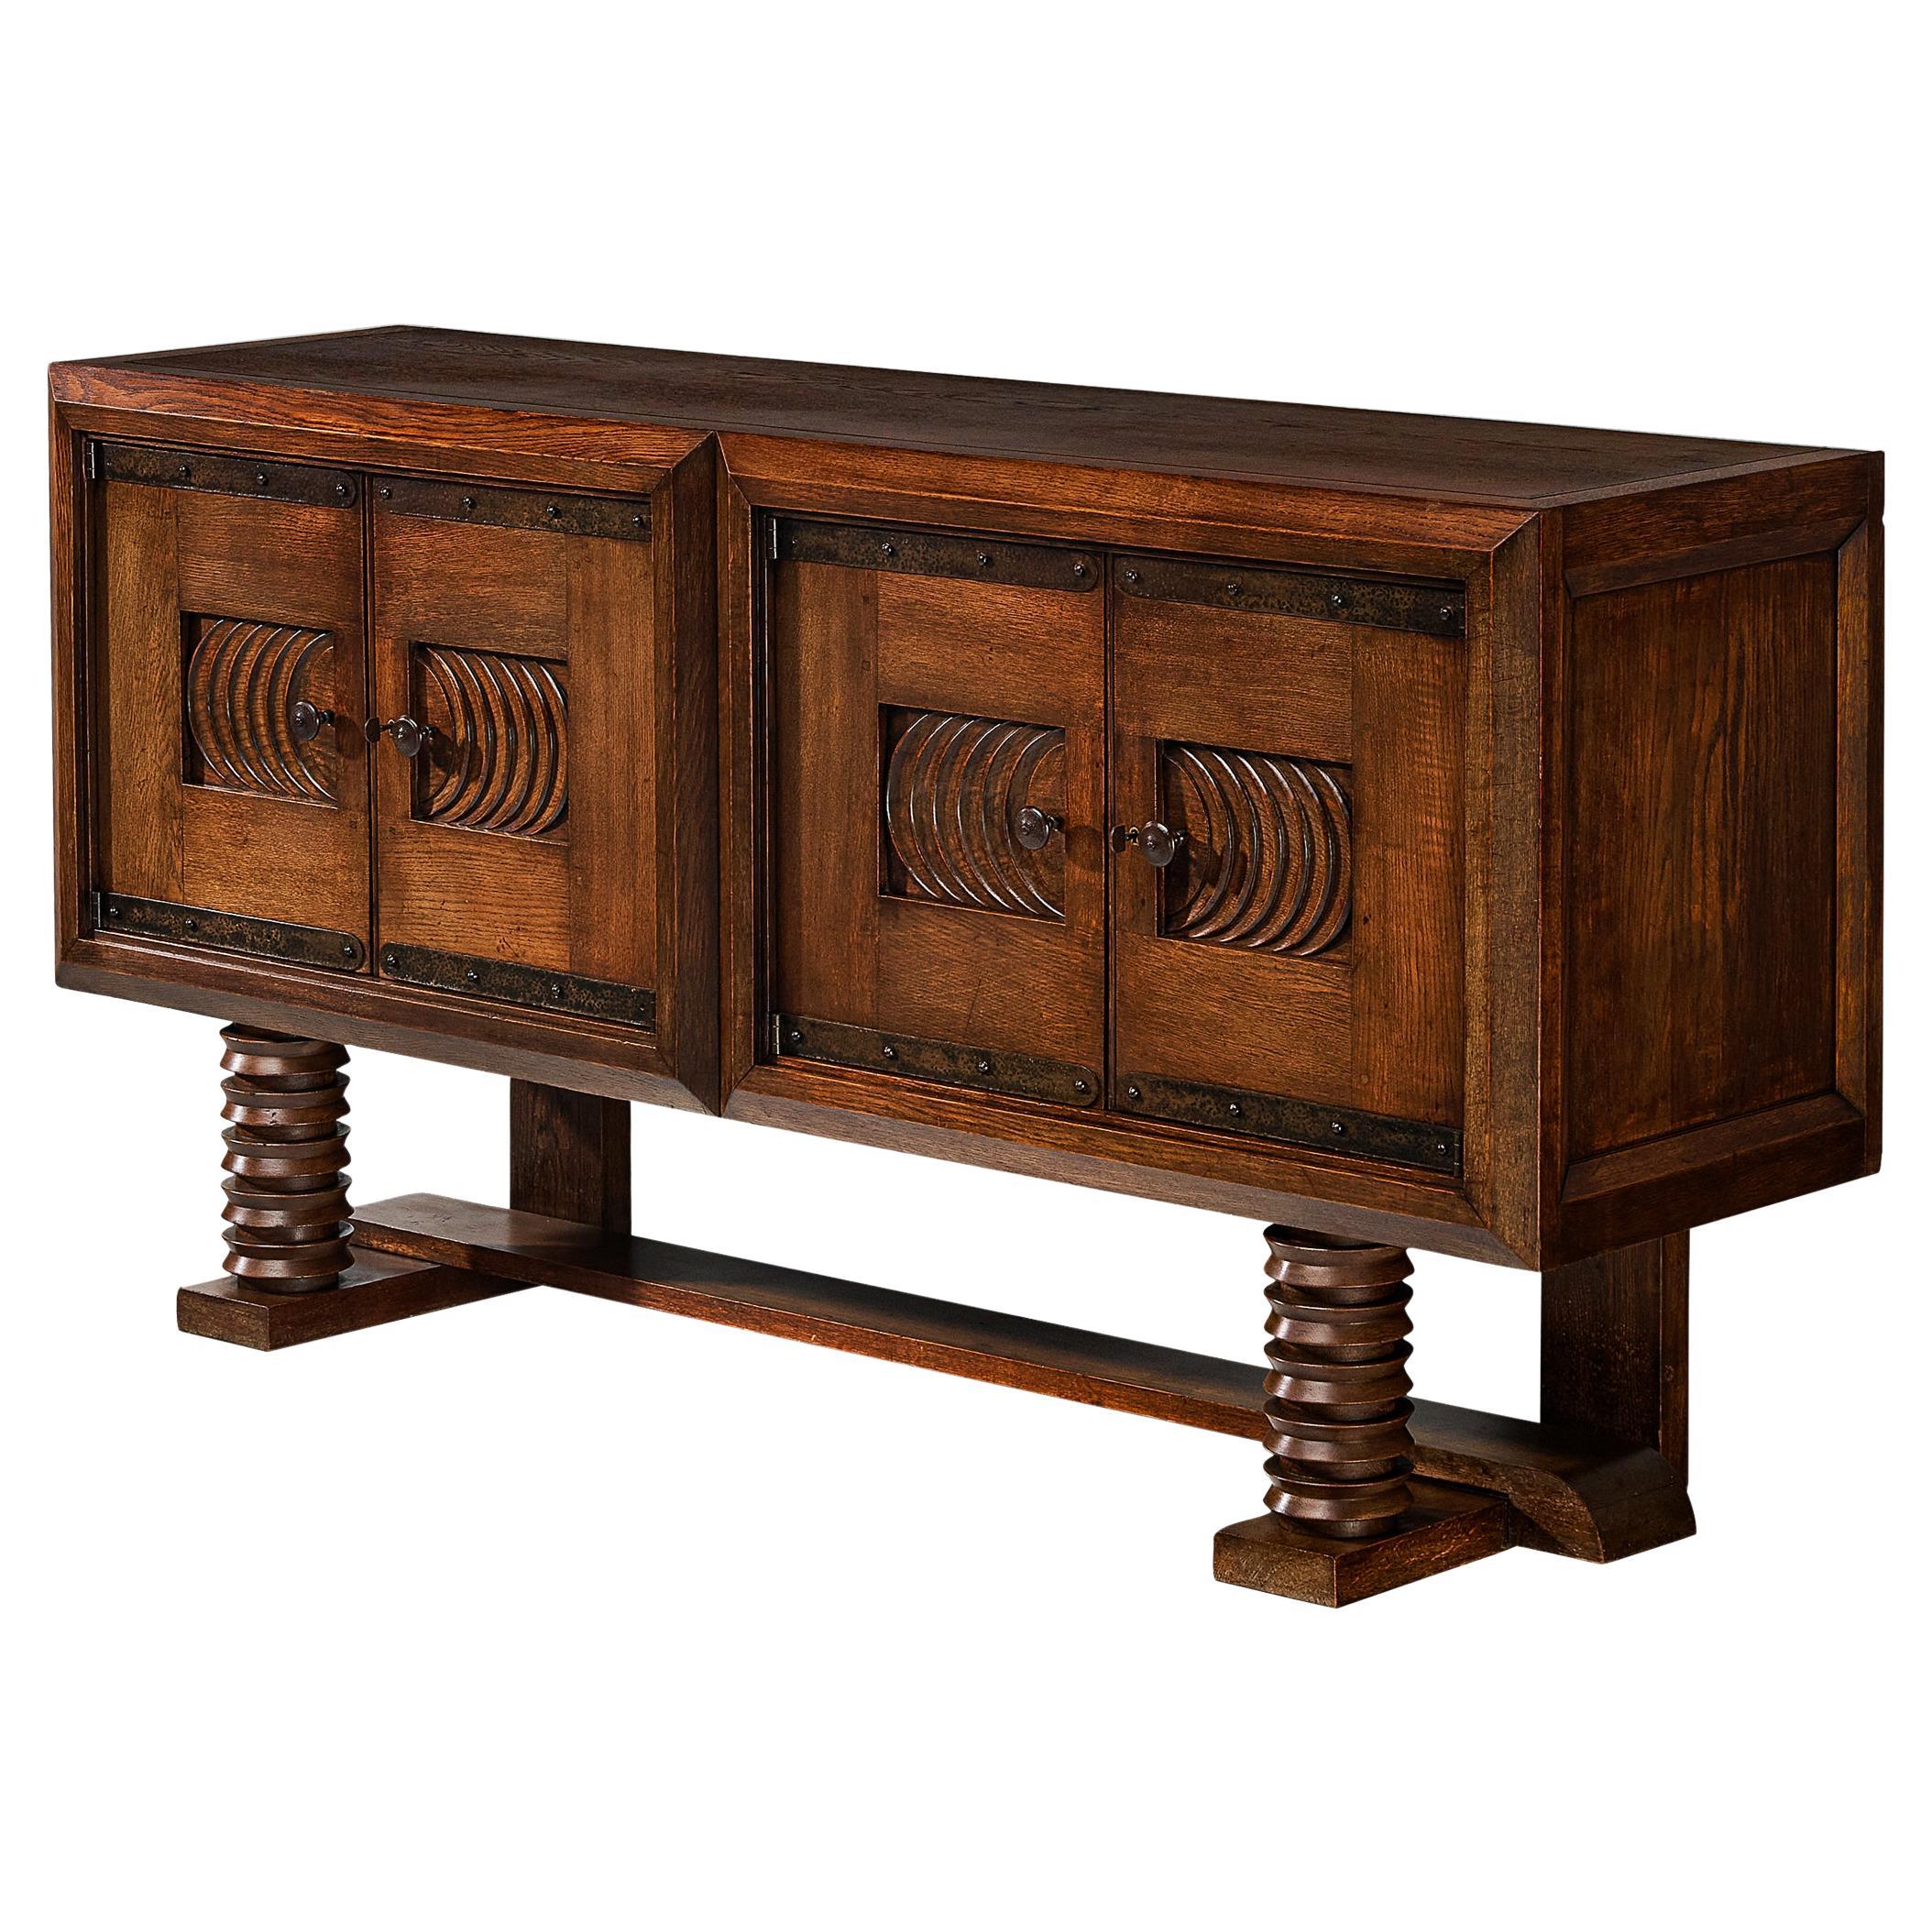  Parisian Art Deco Sideboard in Solid Oak with Iron Elements For Sale